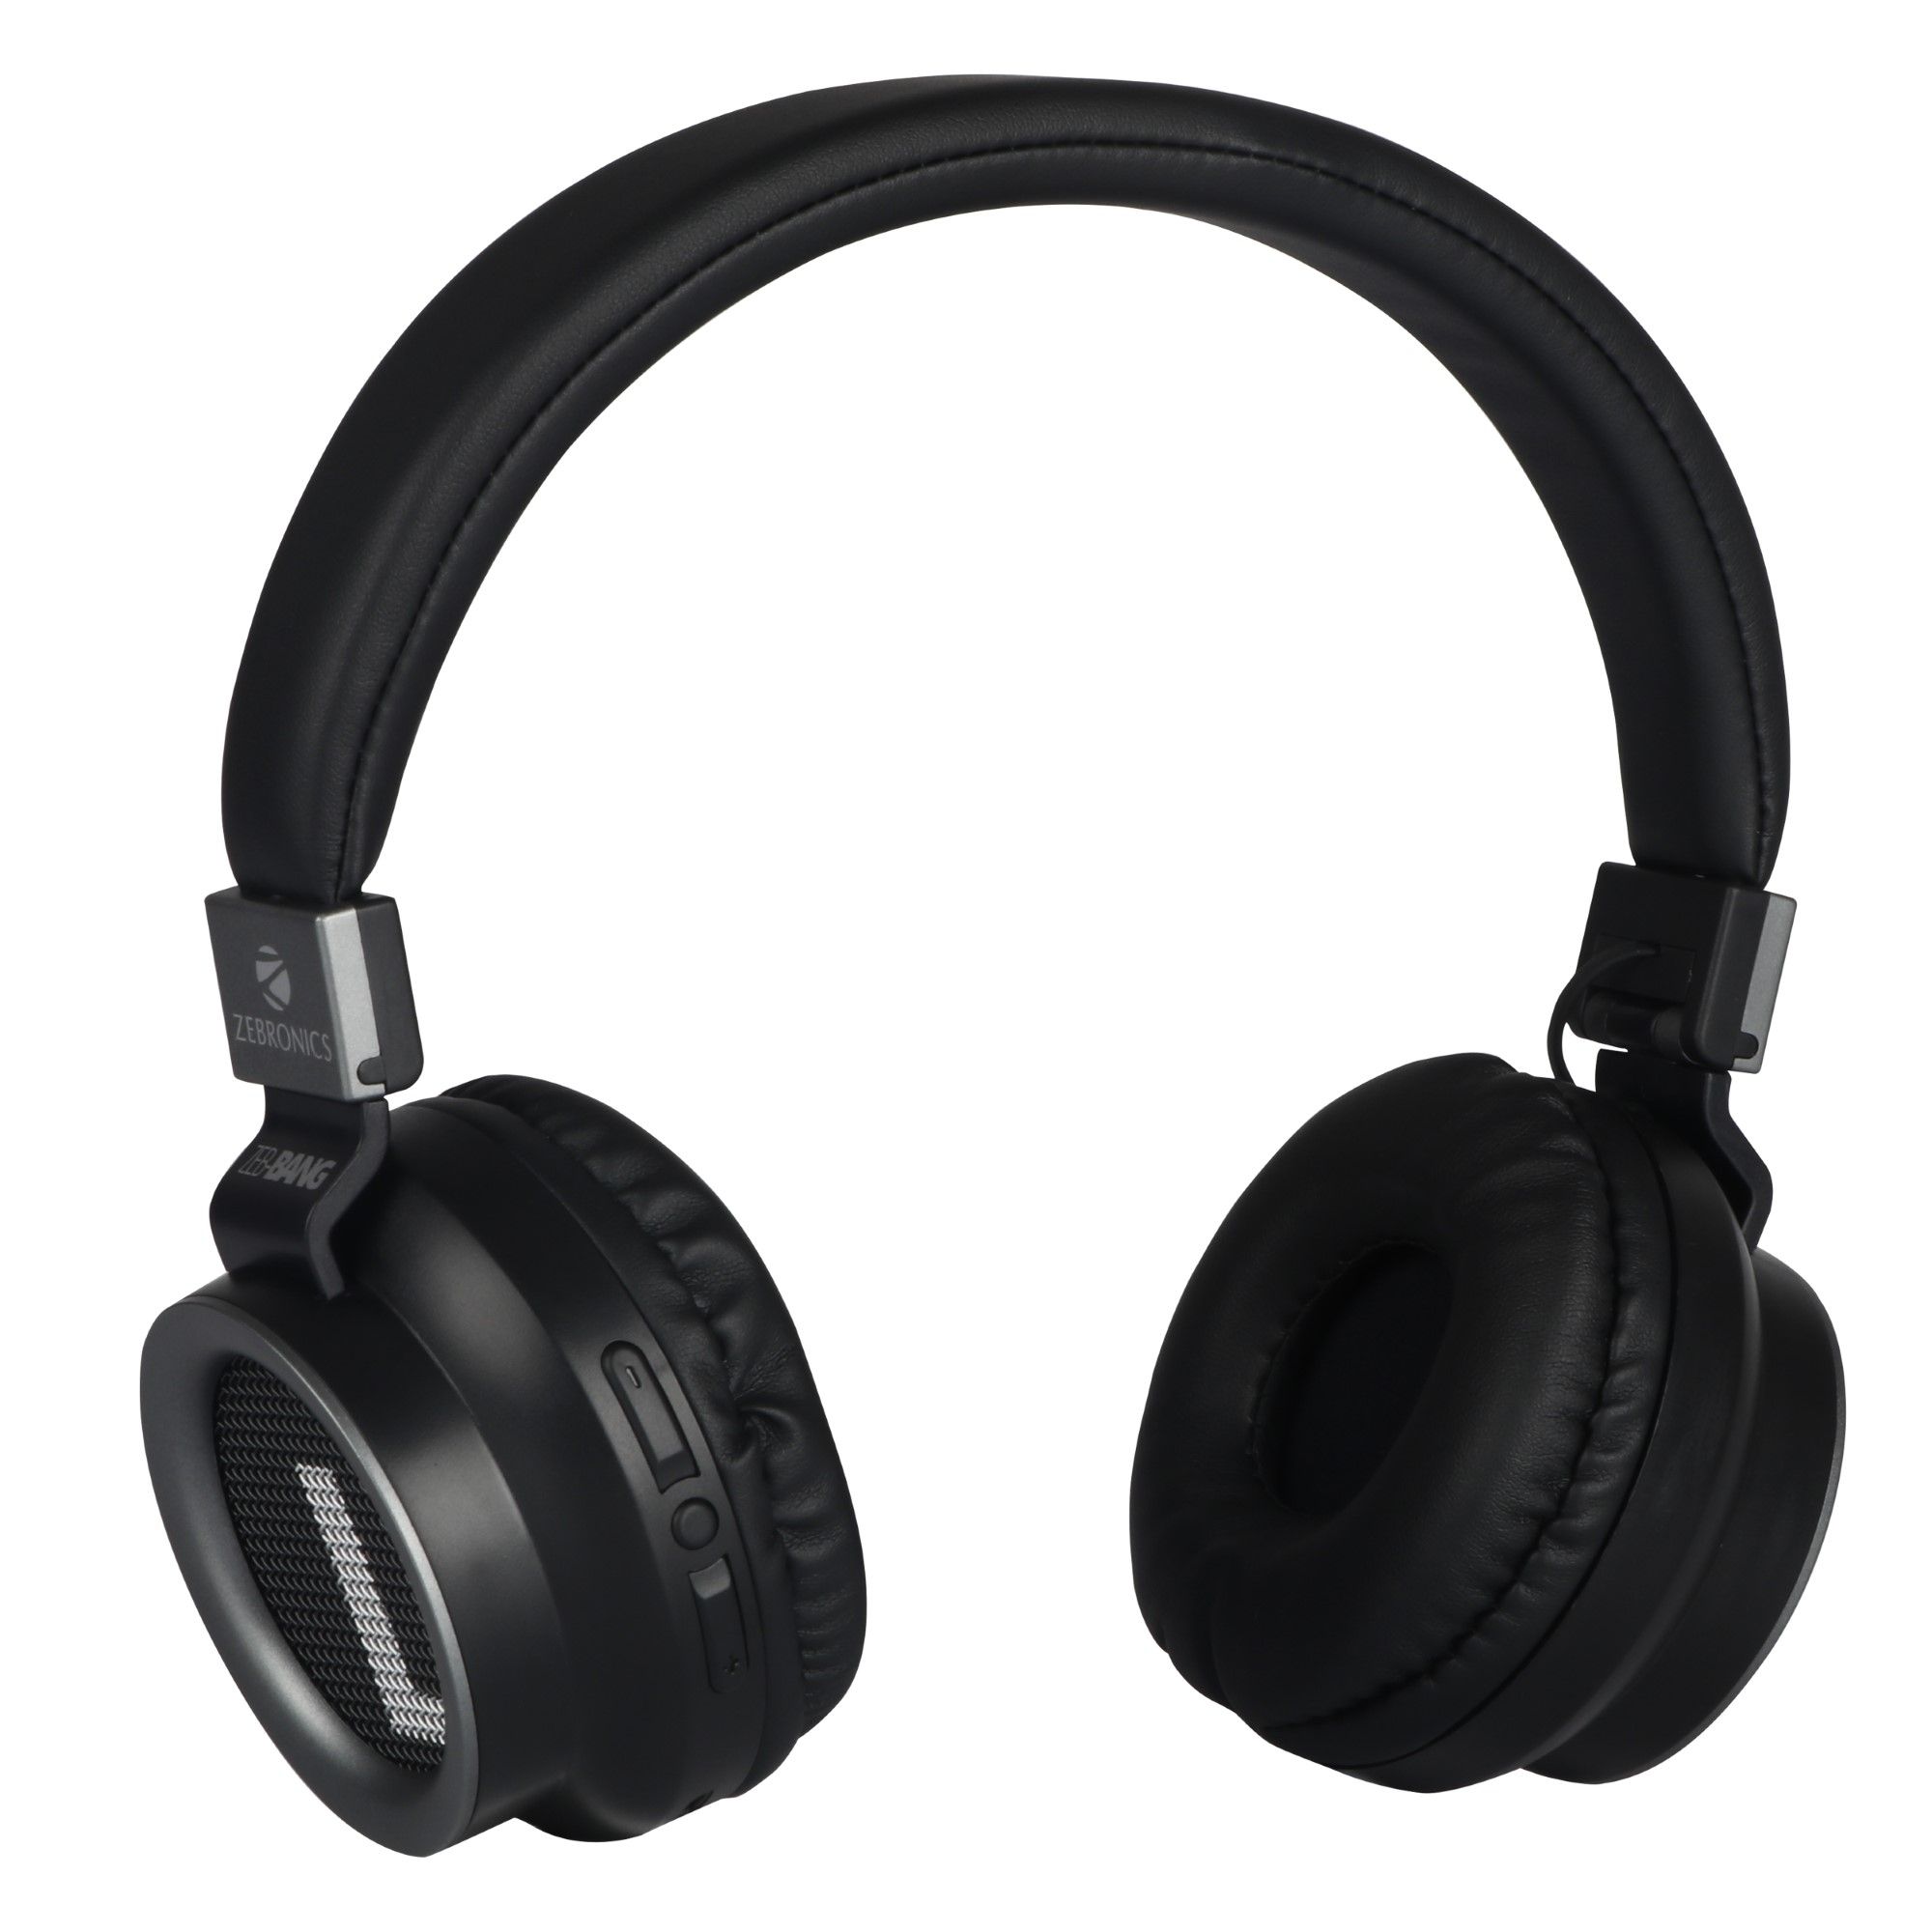 Zebronics Zeb-Bang Wireless Bluetooth Headphone 16Hrs Playback time&Supports Voice Assistant (Black)